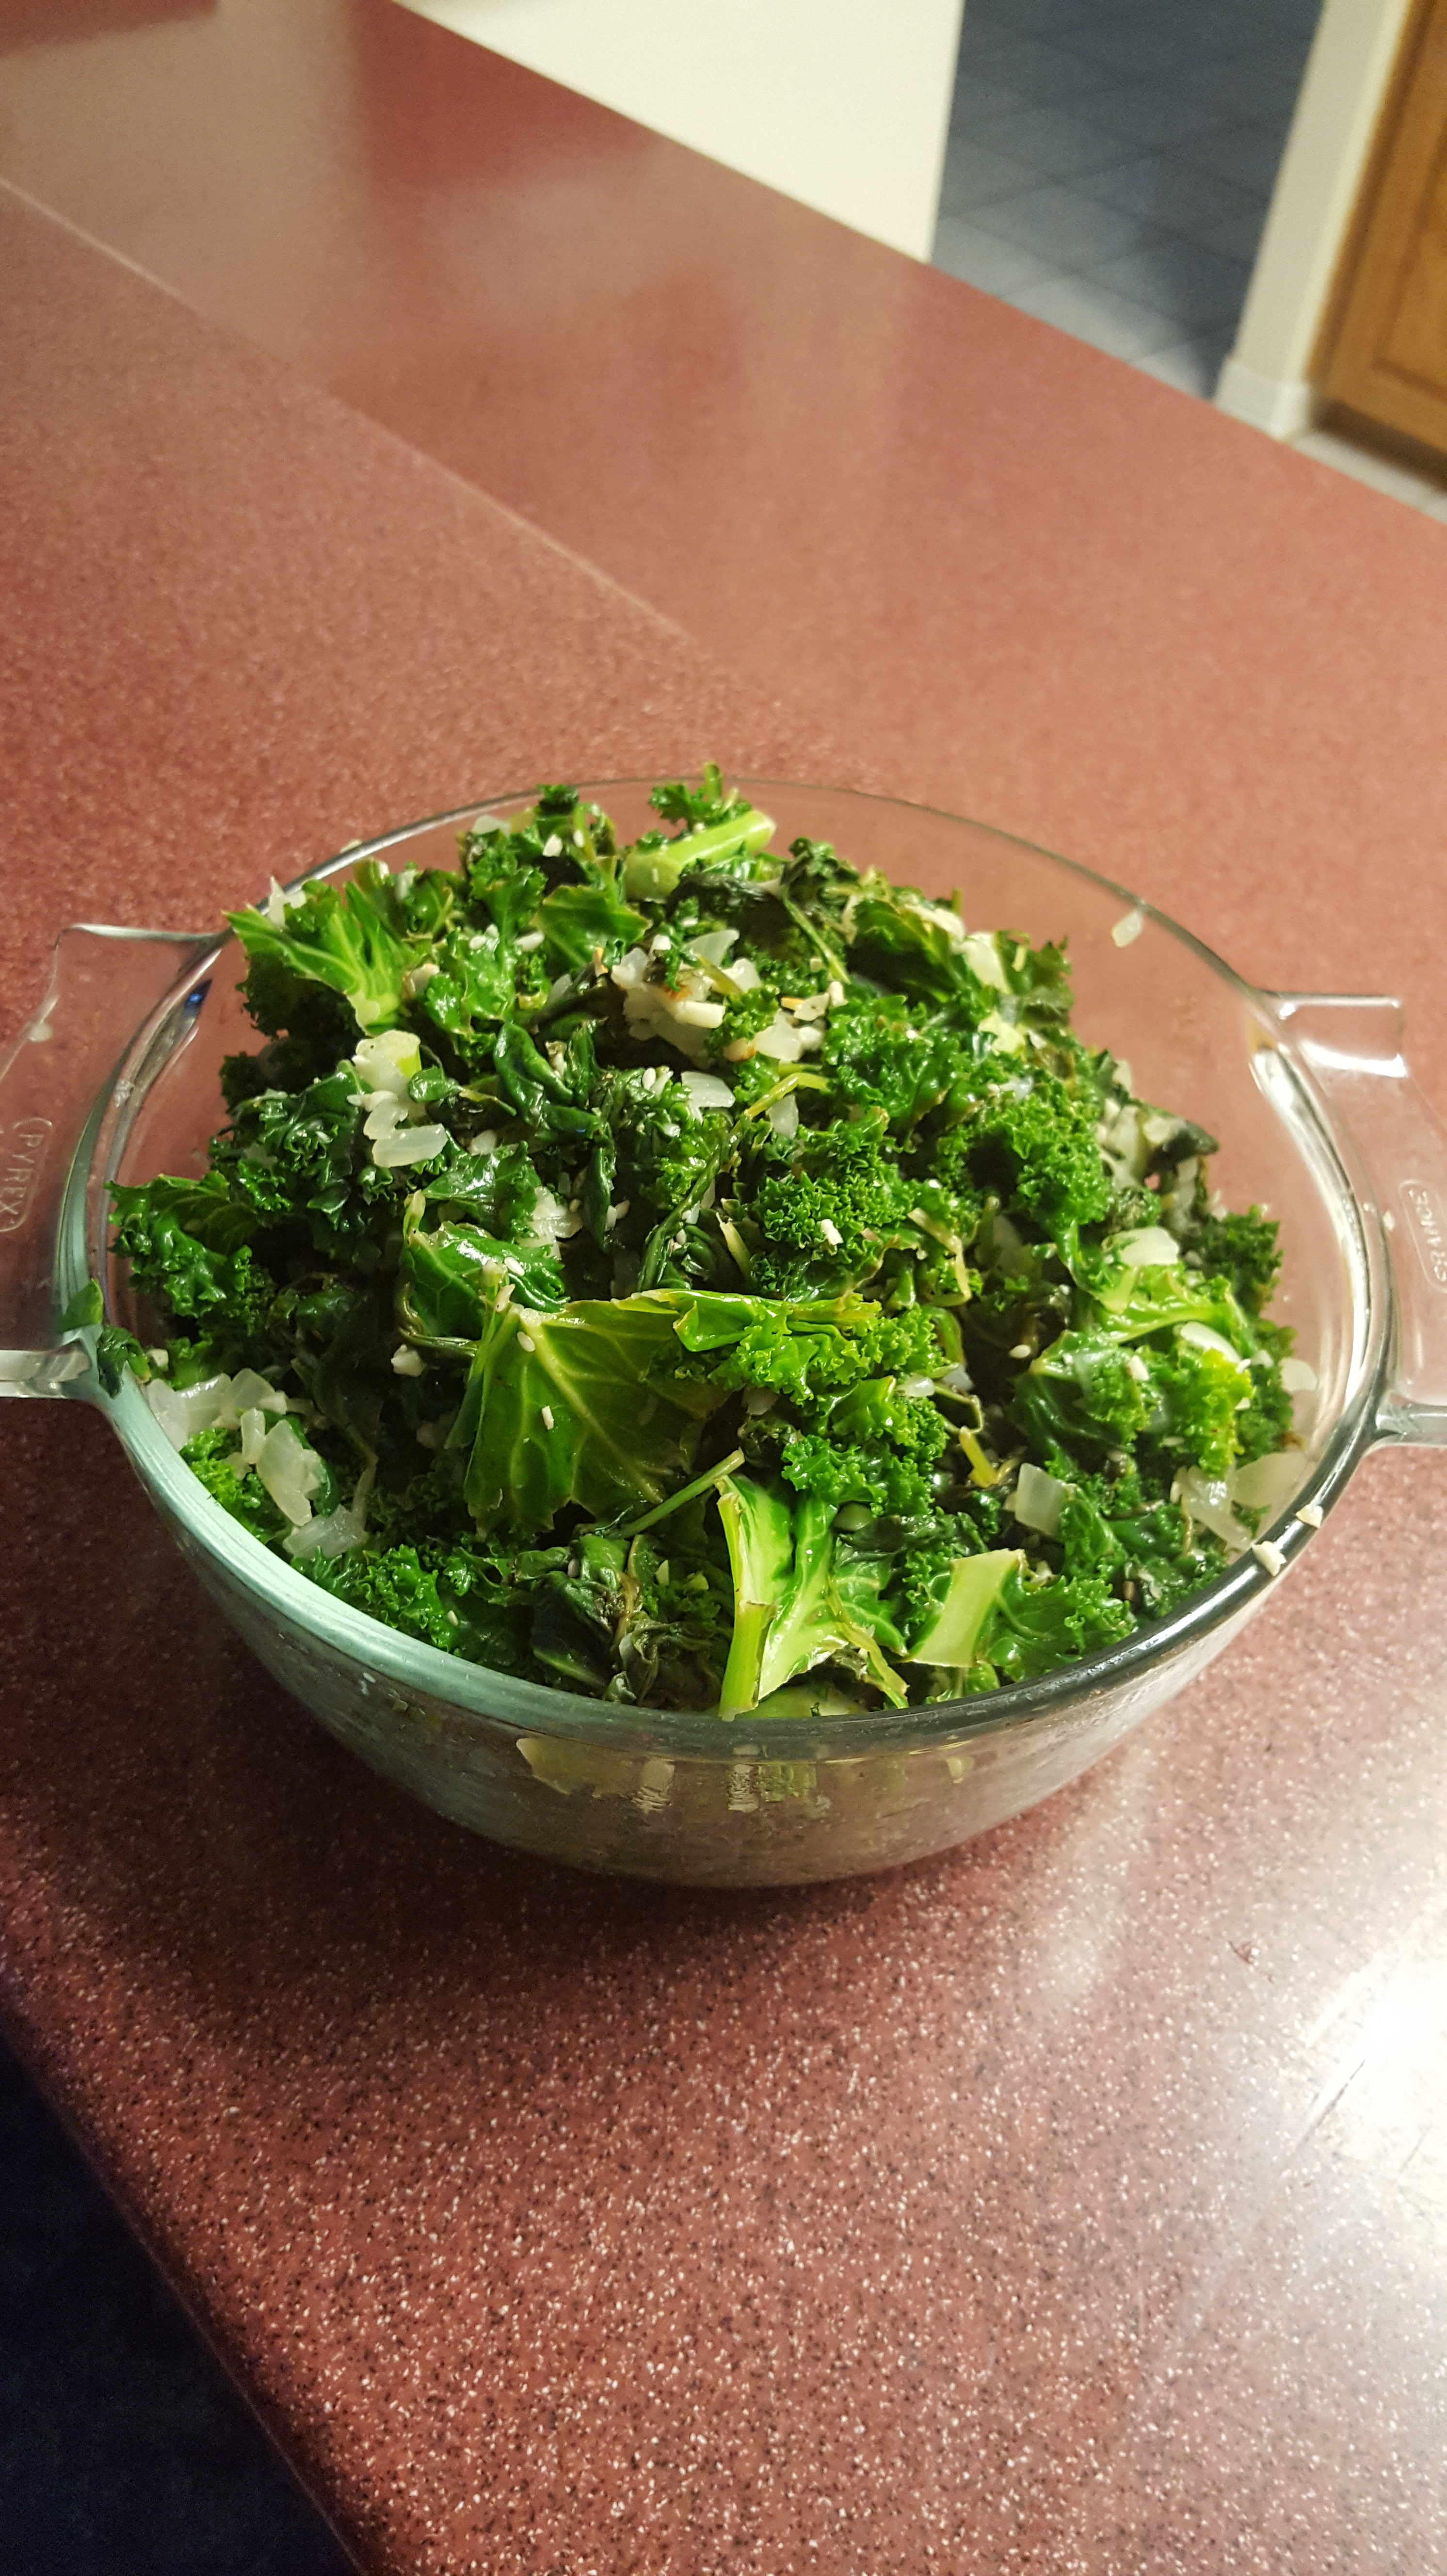 Remedy Psoriasis Naturally kale and spinach